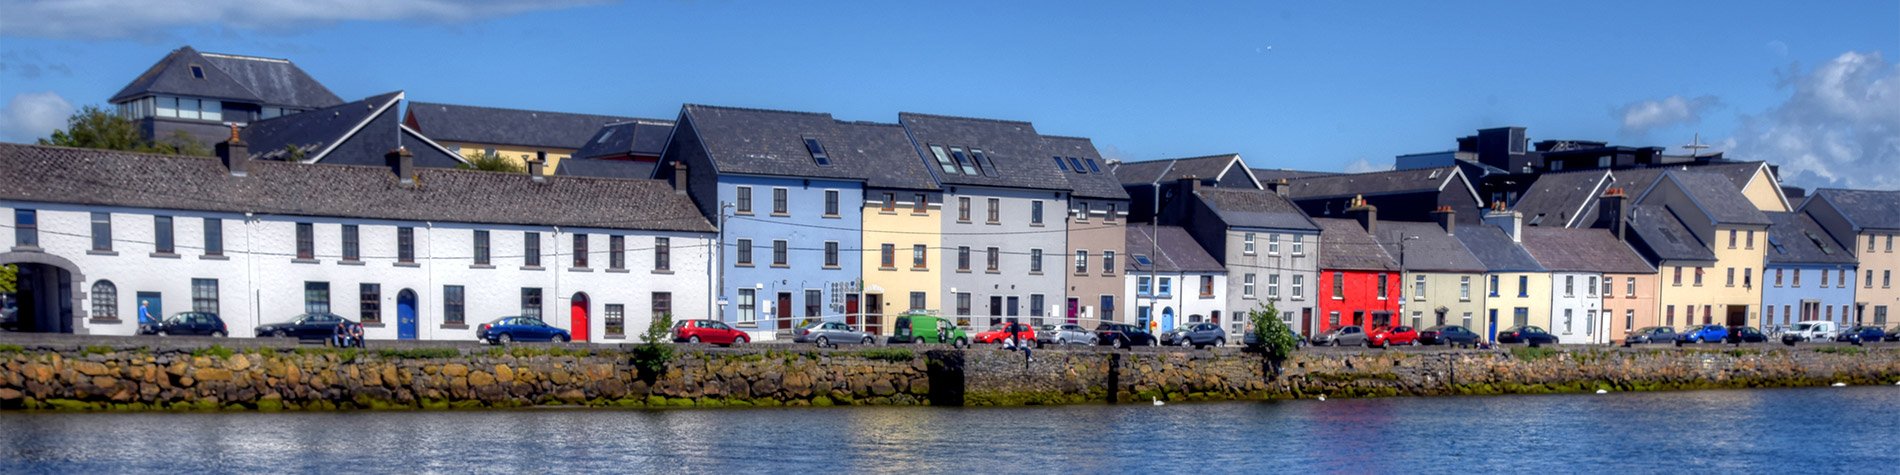 Galway city's houses by River Corrib